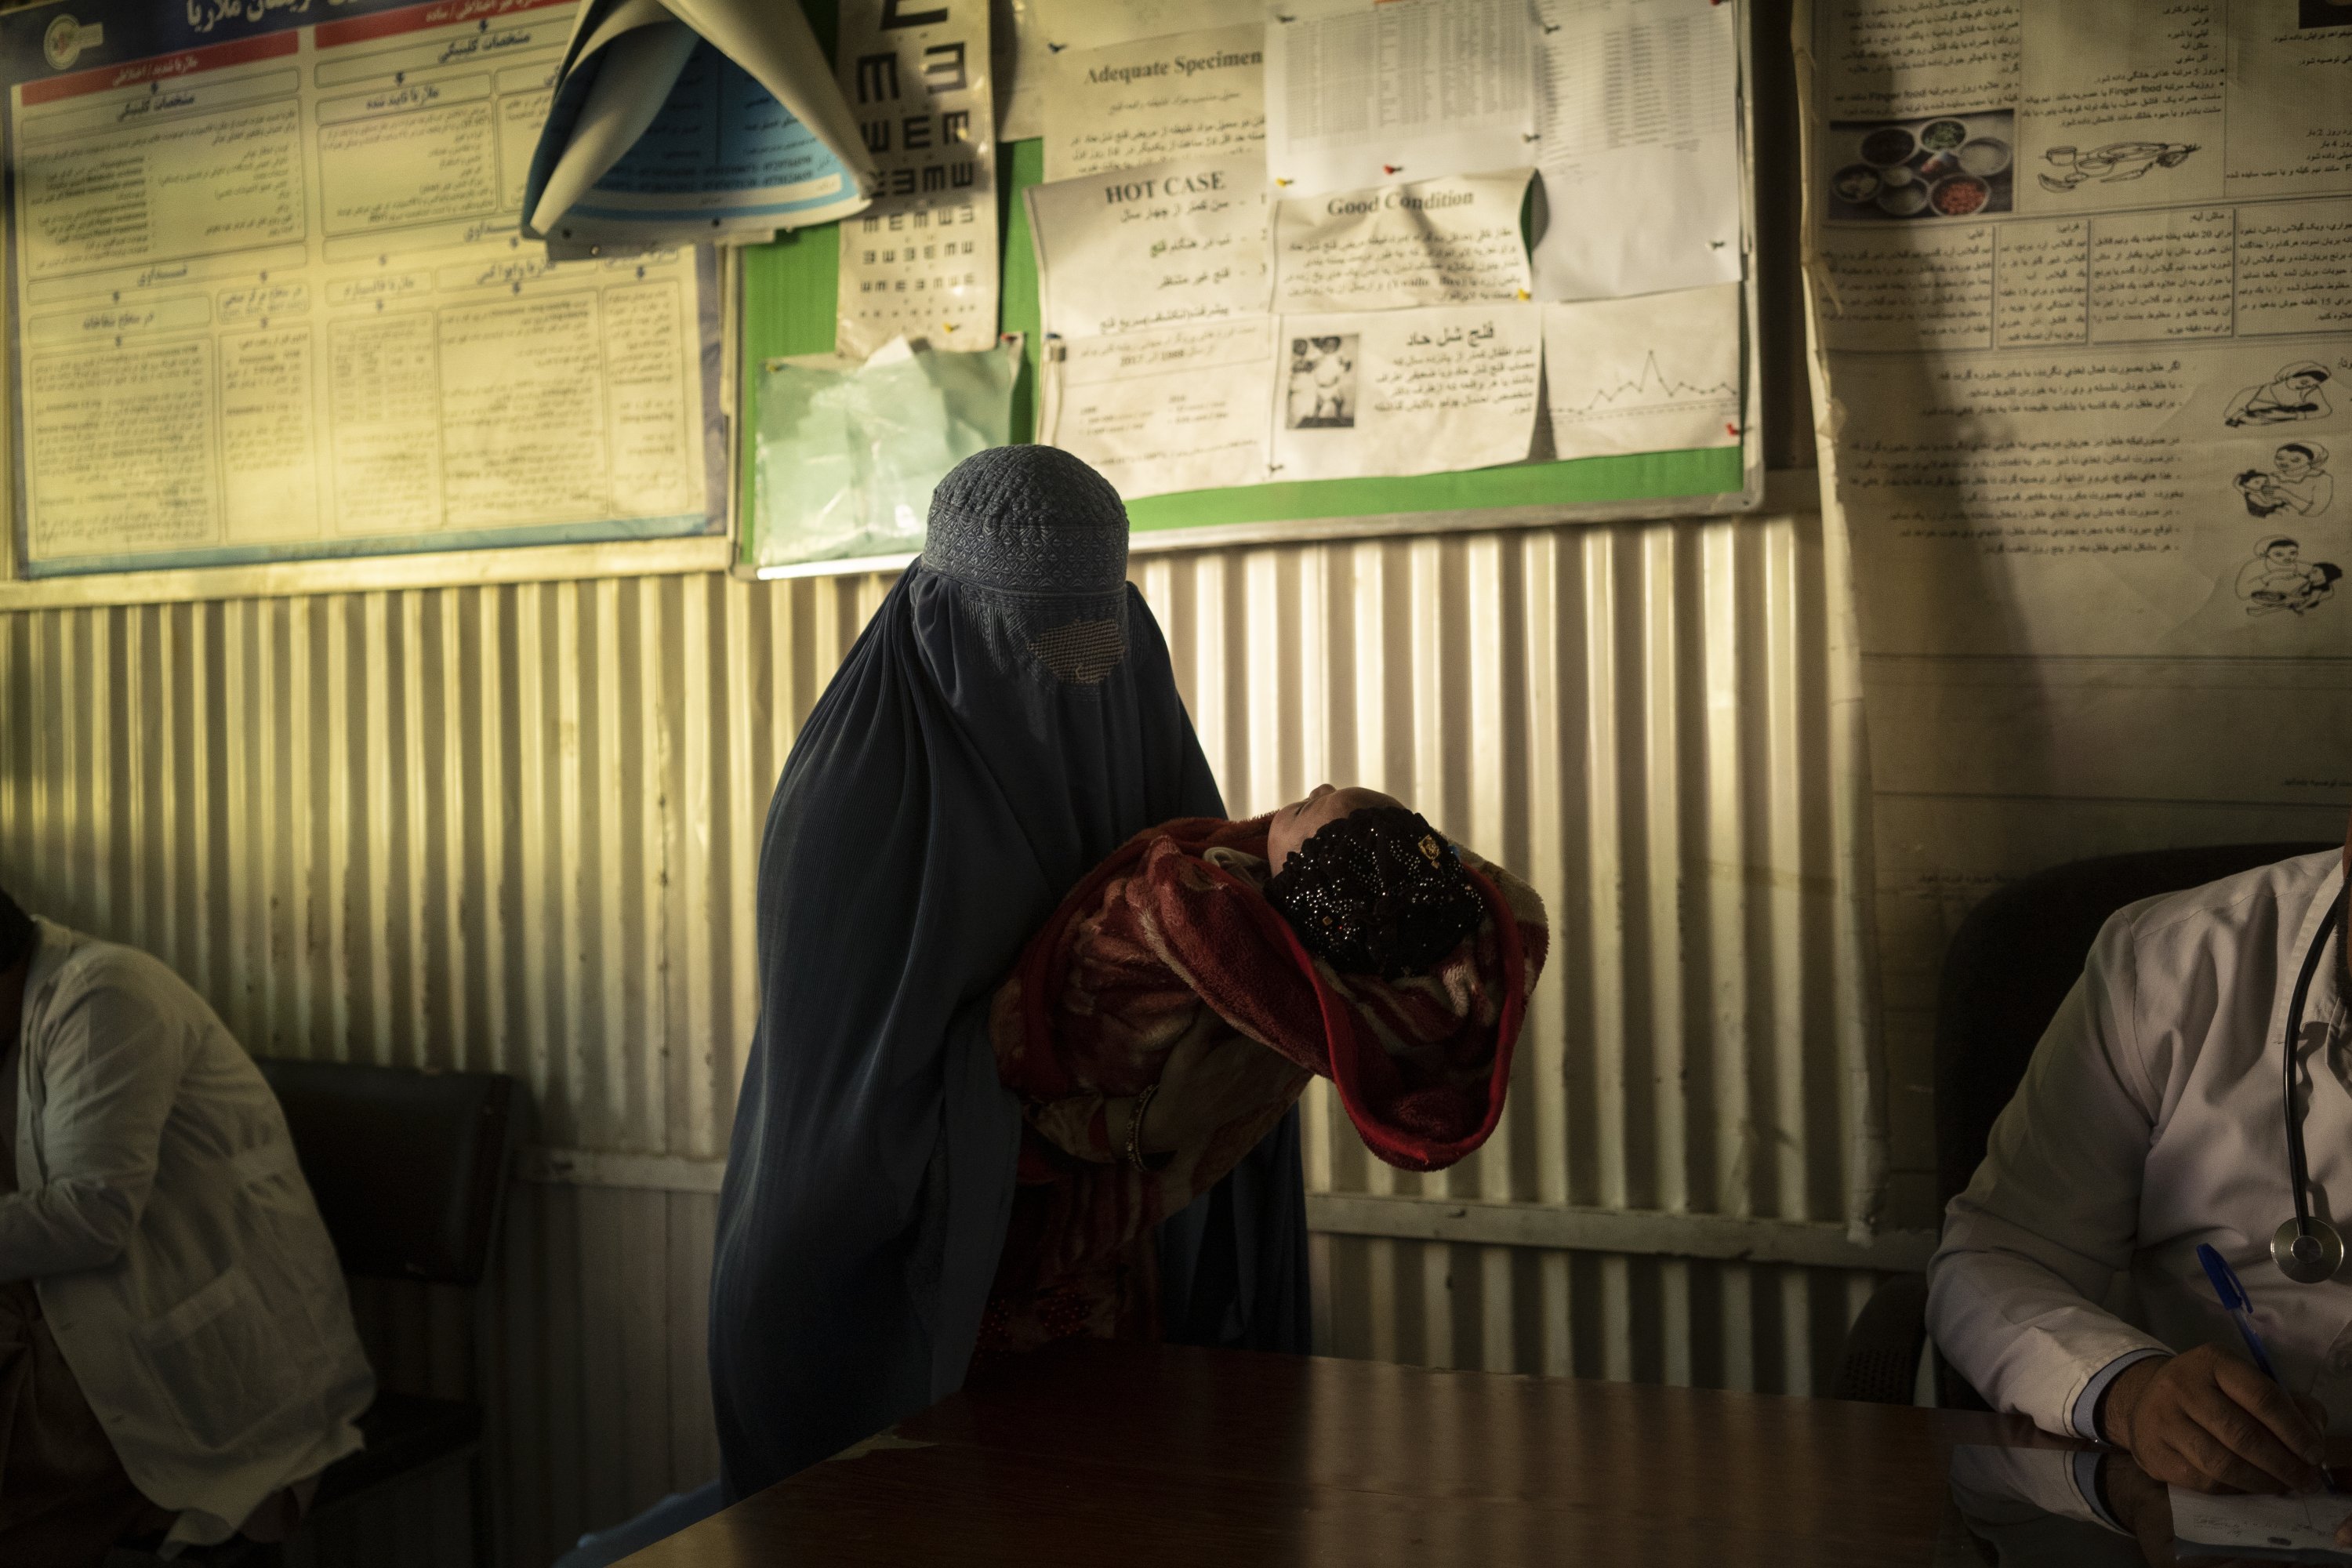 A woman holds her baby before seeing the doctor in the hospital in Mirbacha Kot, Afghanistan, Oct. 25, 2021. (AP Photo)